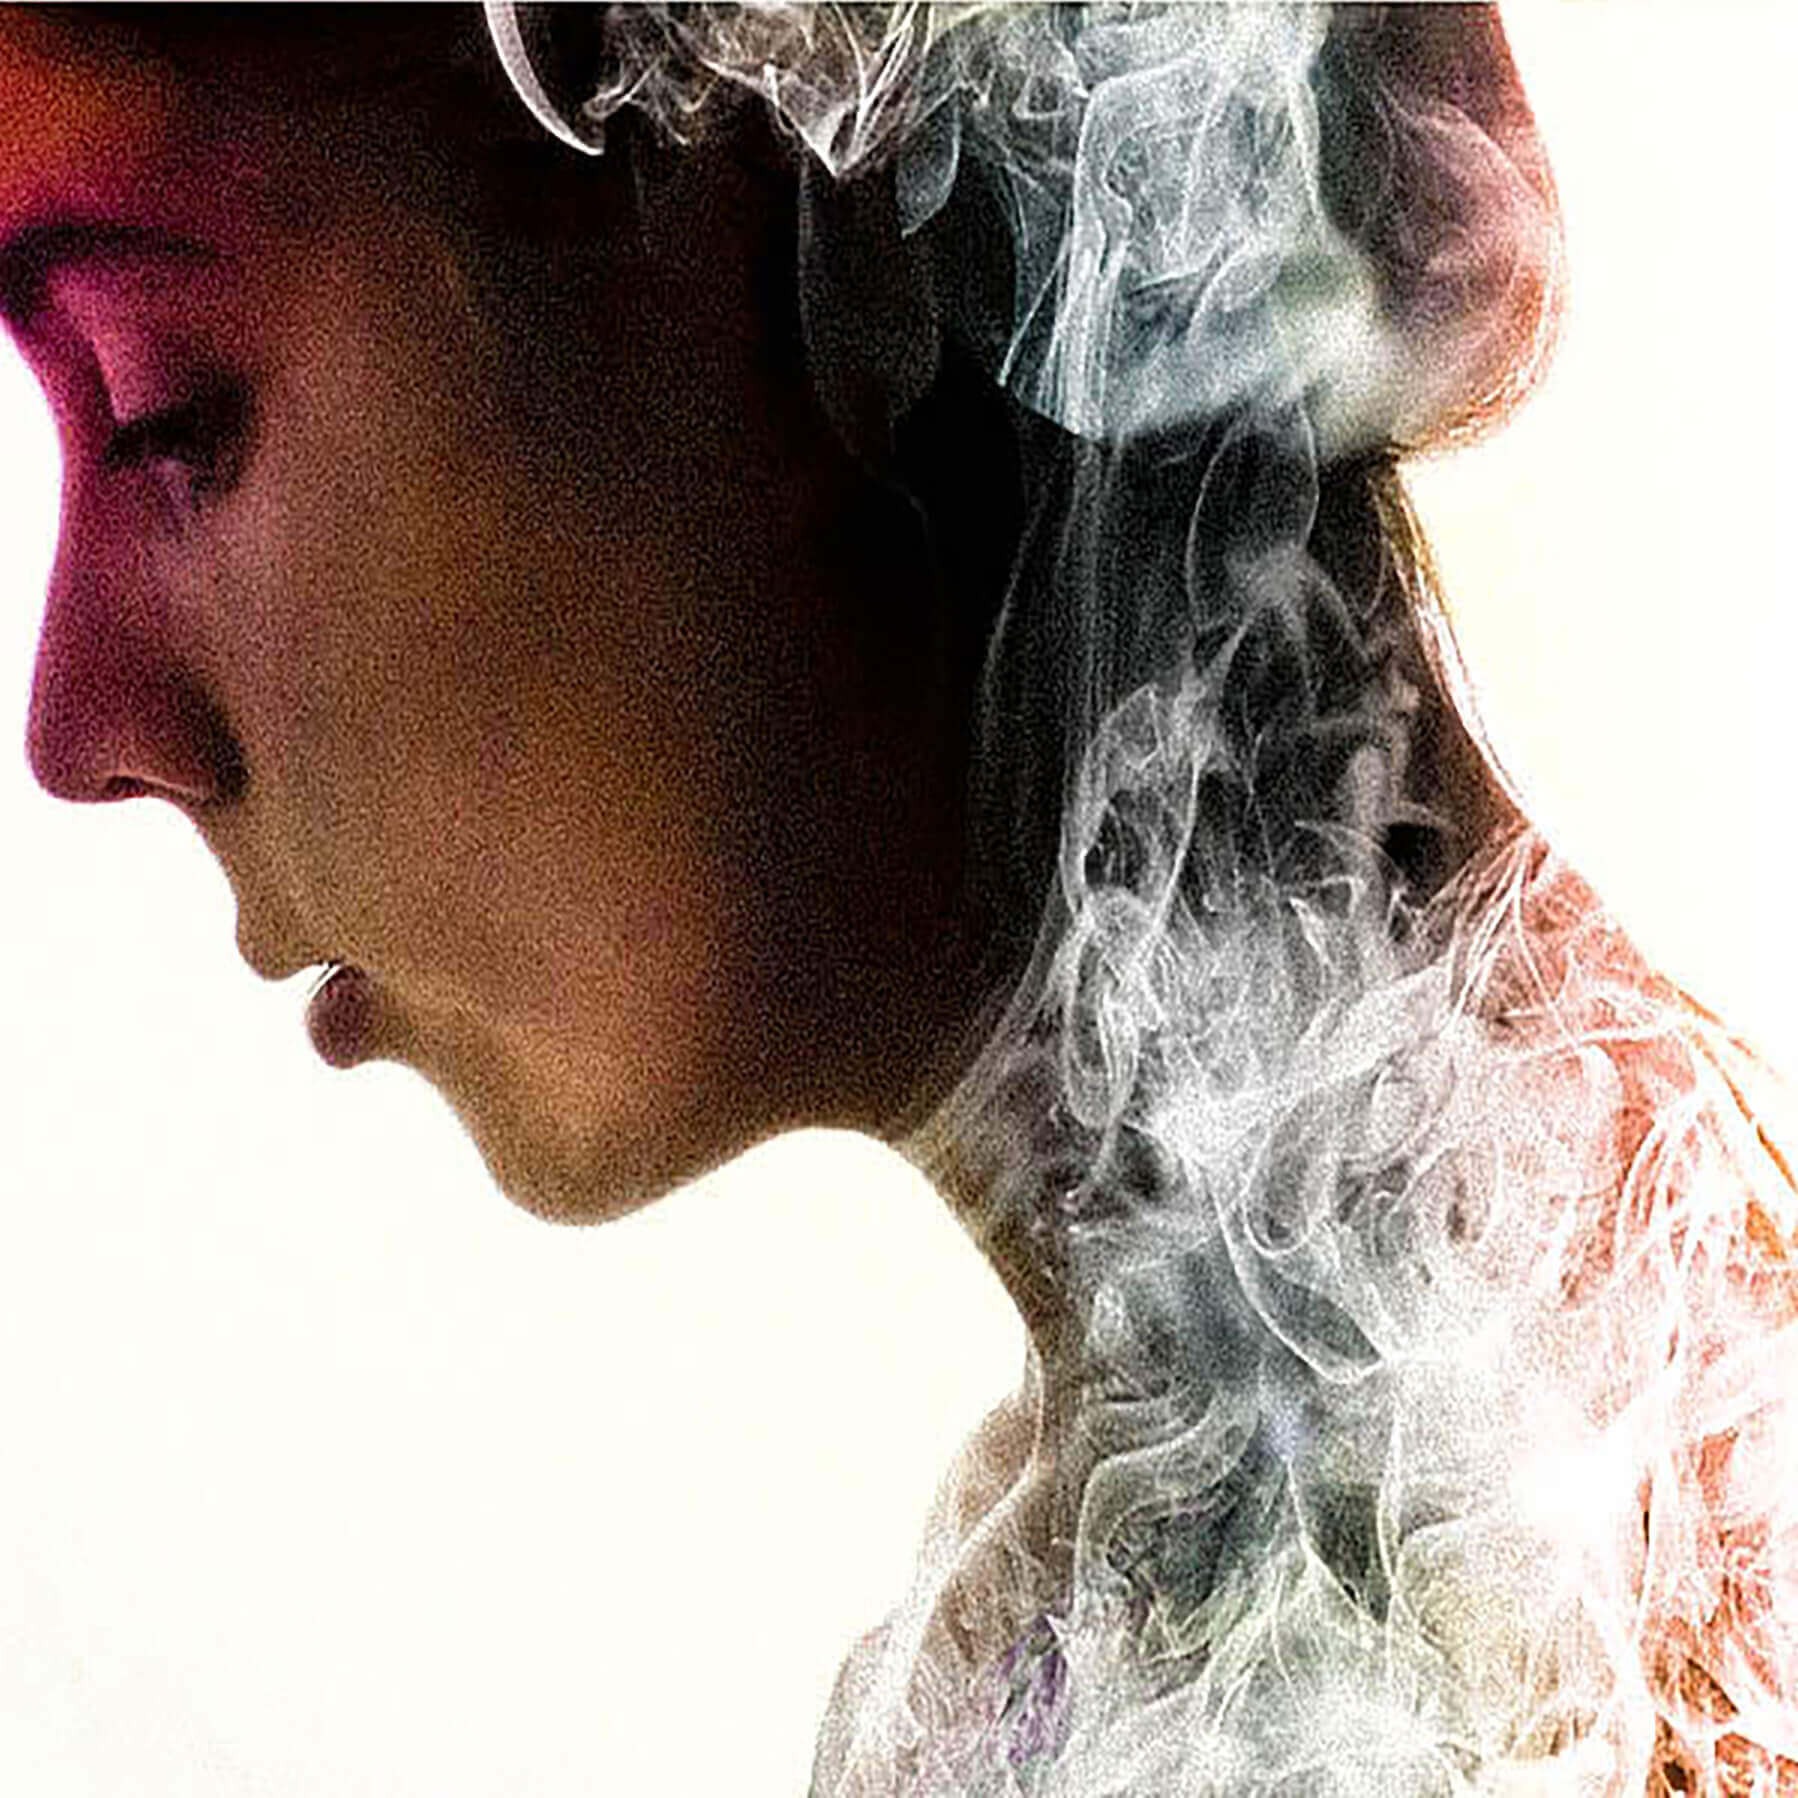 Double Exposure - Smoke on Woman's Face